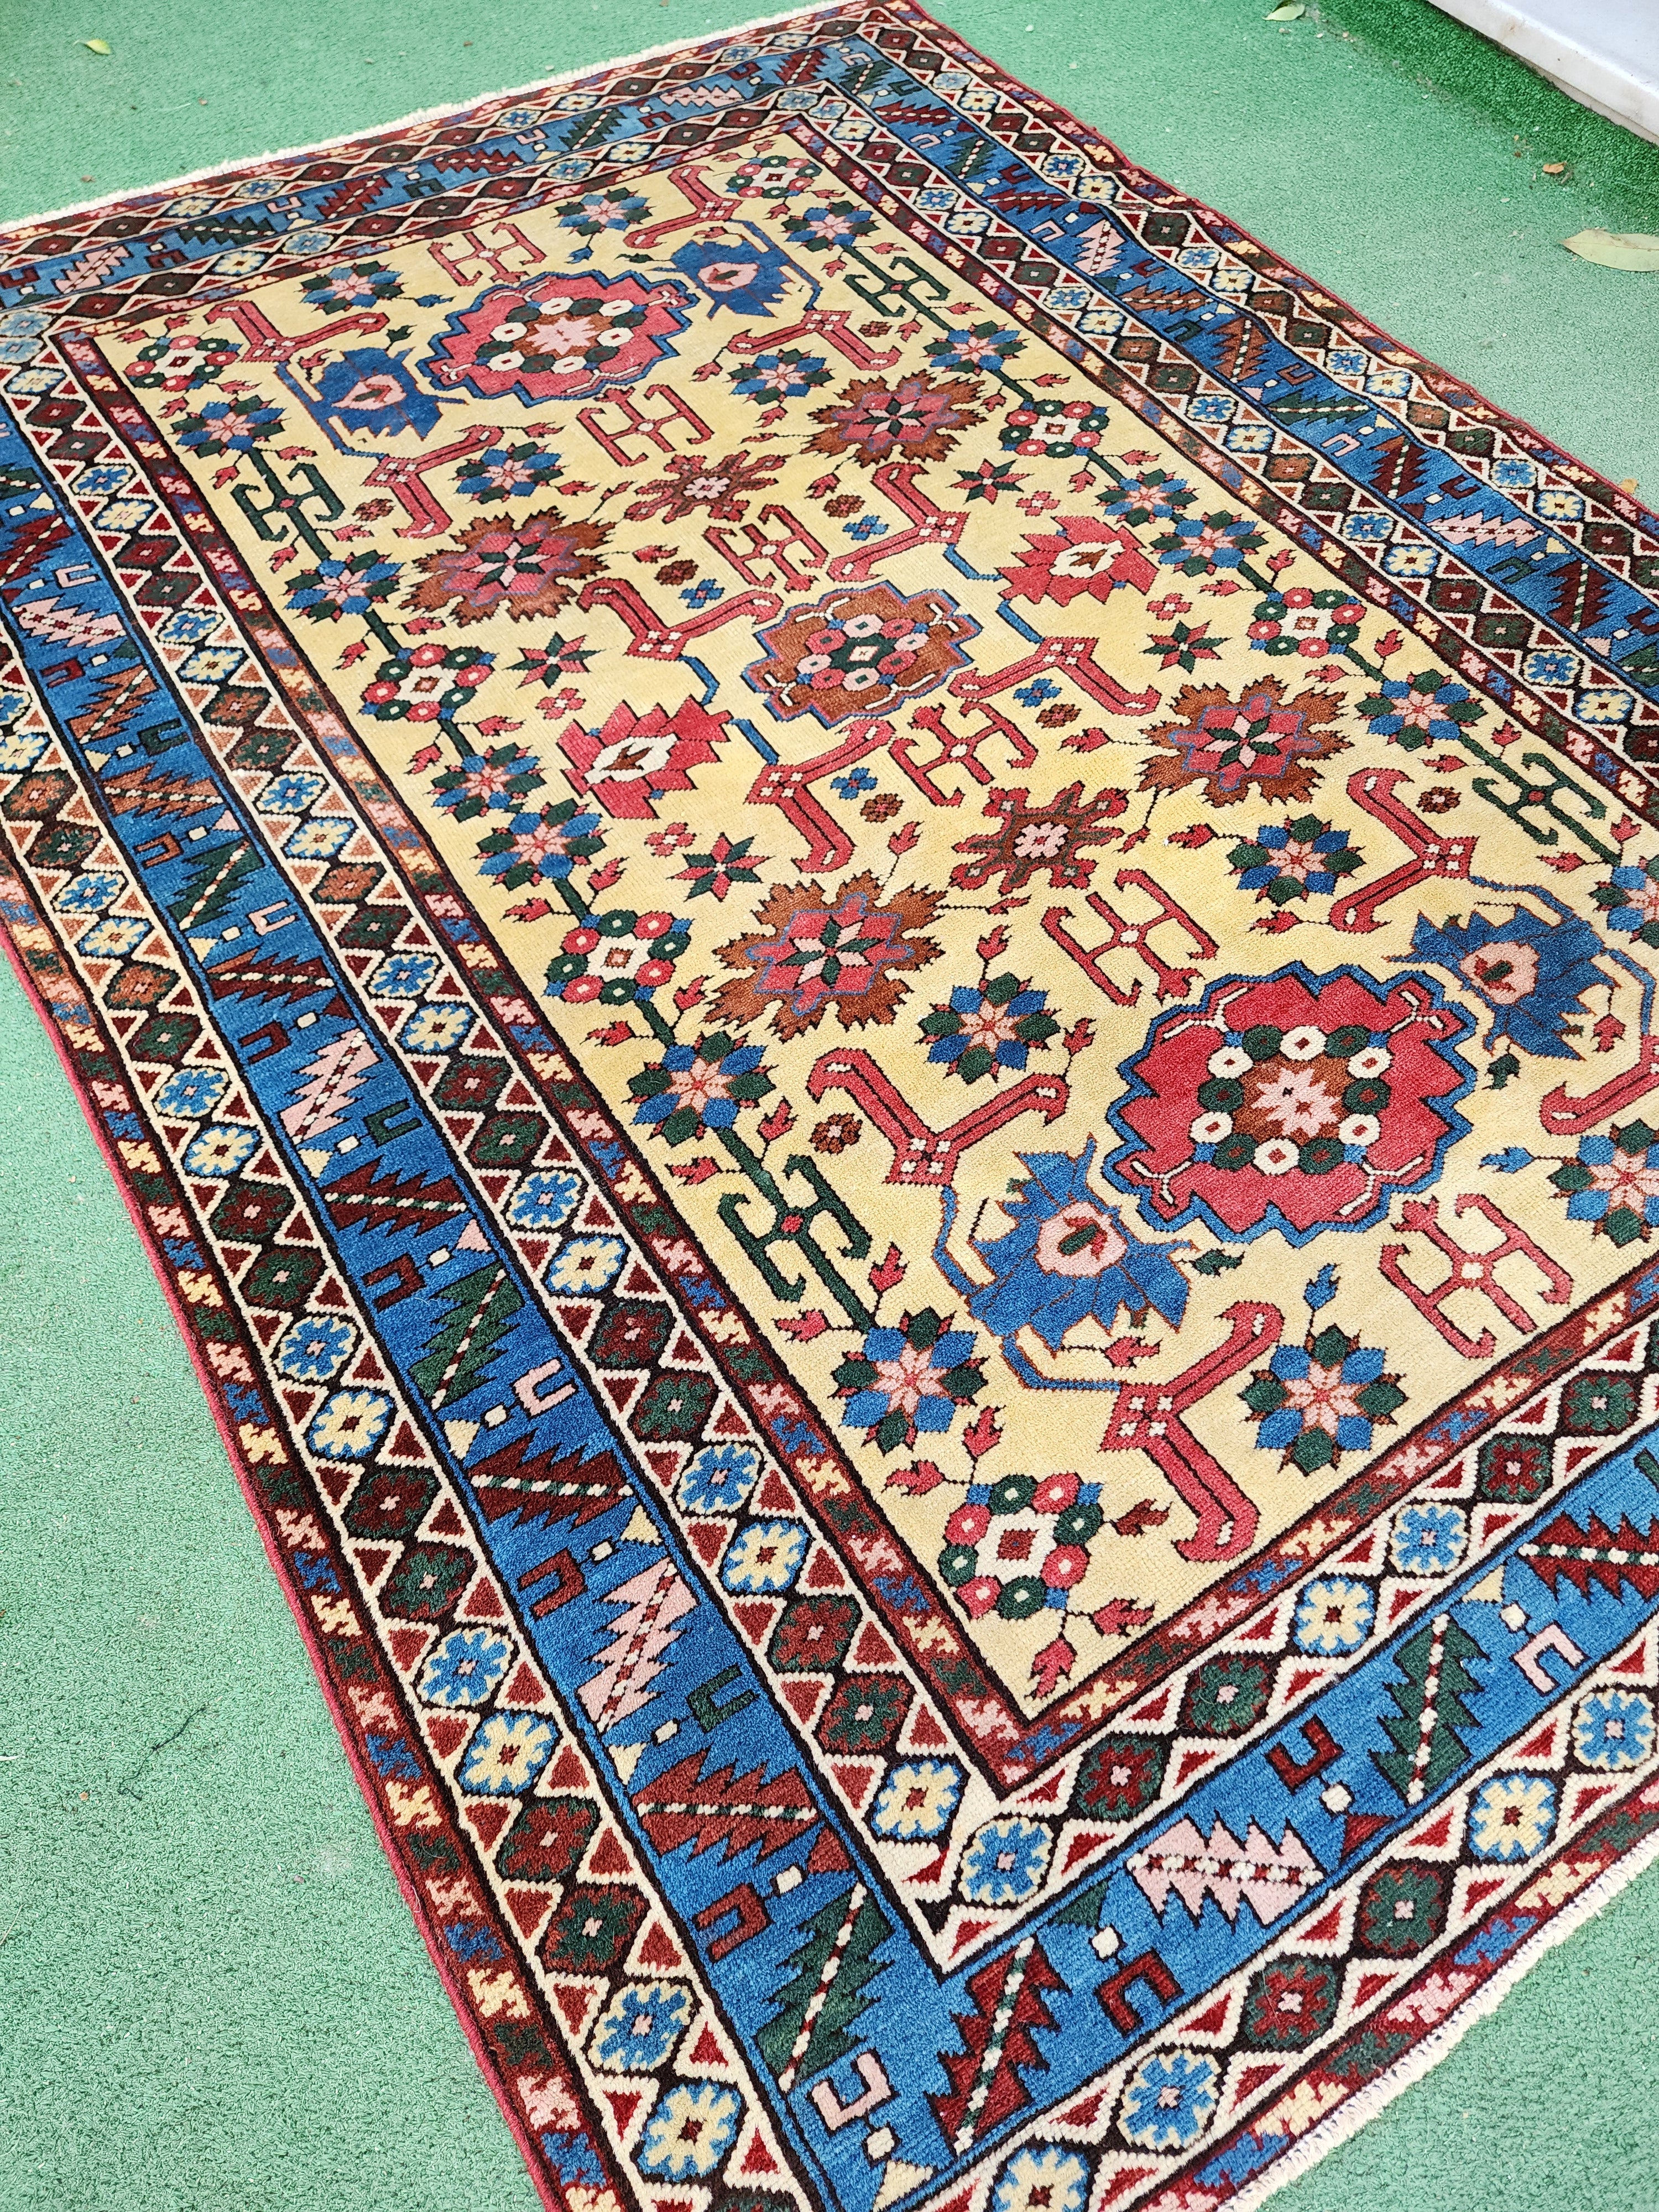 Antique Caucasian Shirvan Rug 6 x 4 ft, Yellow Blue and Red Tribal Caucasian Area Rug